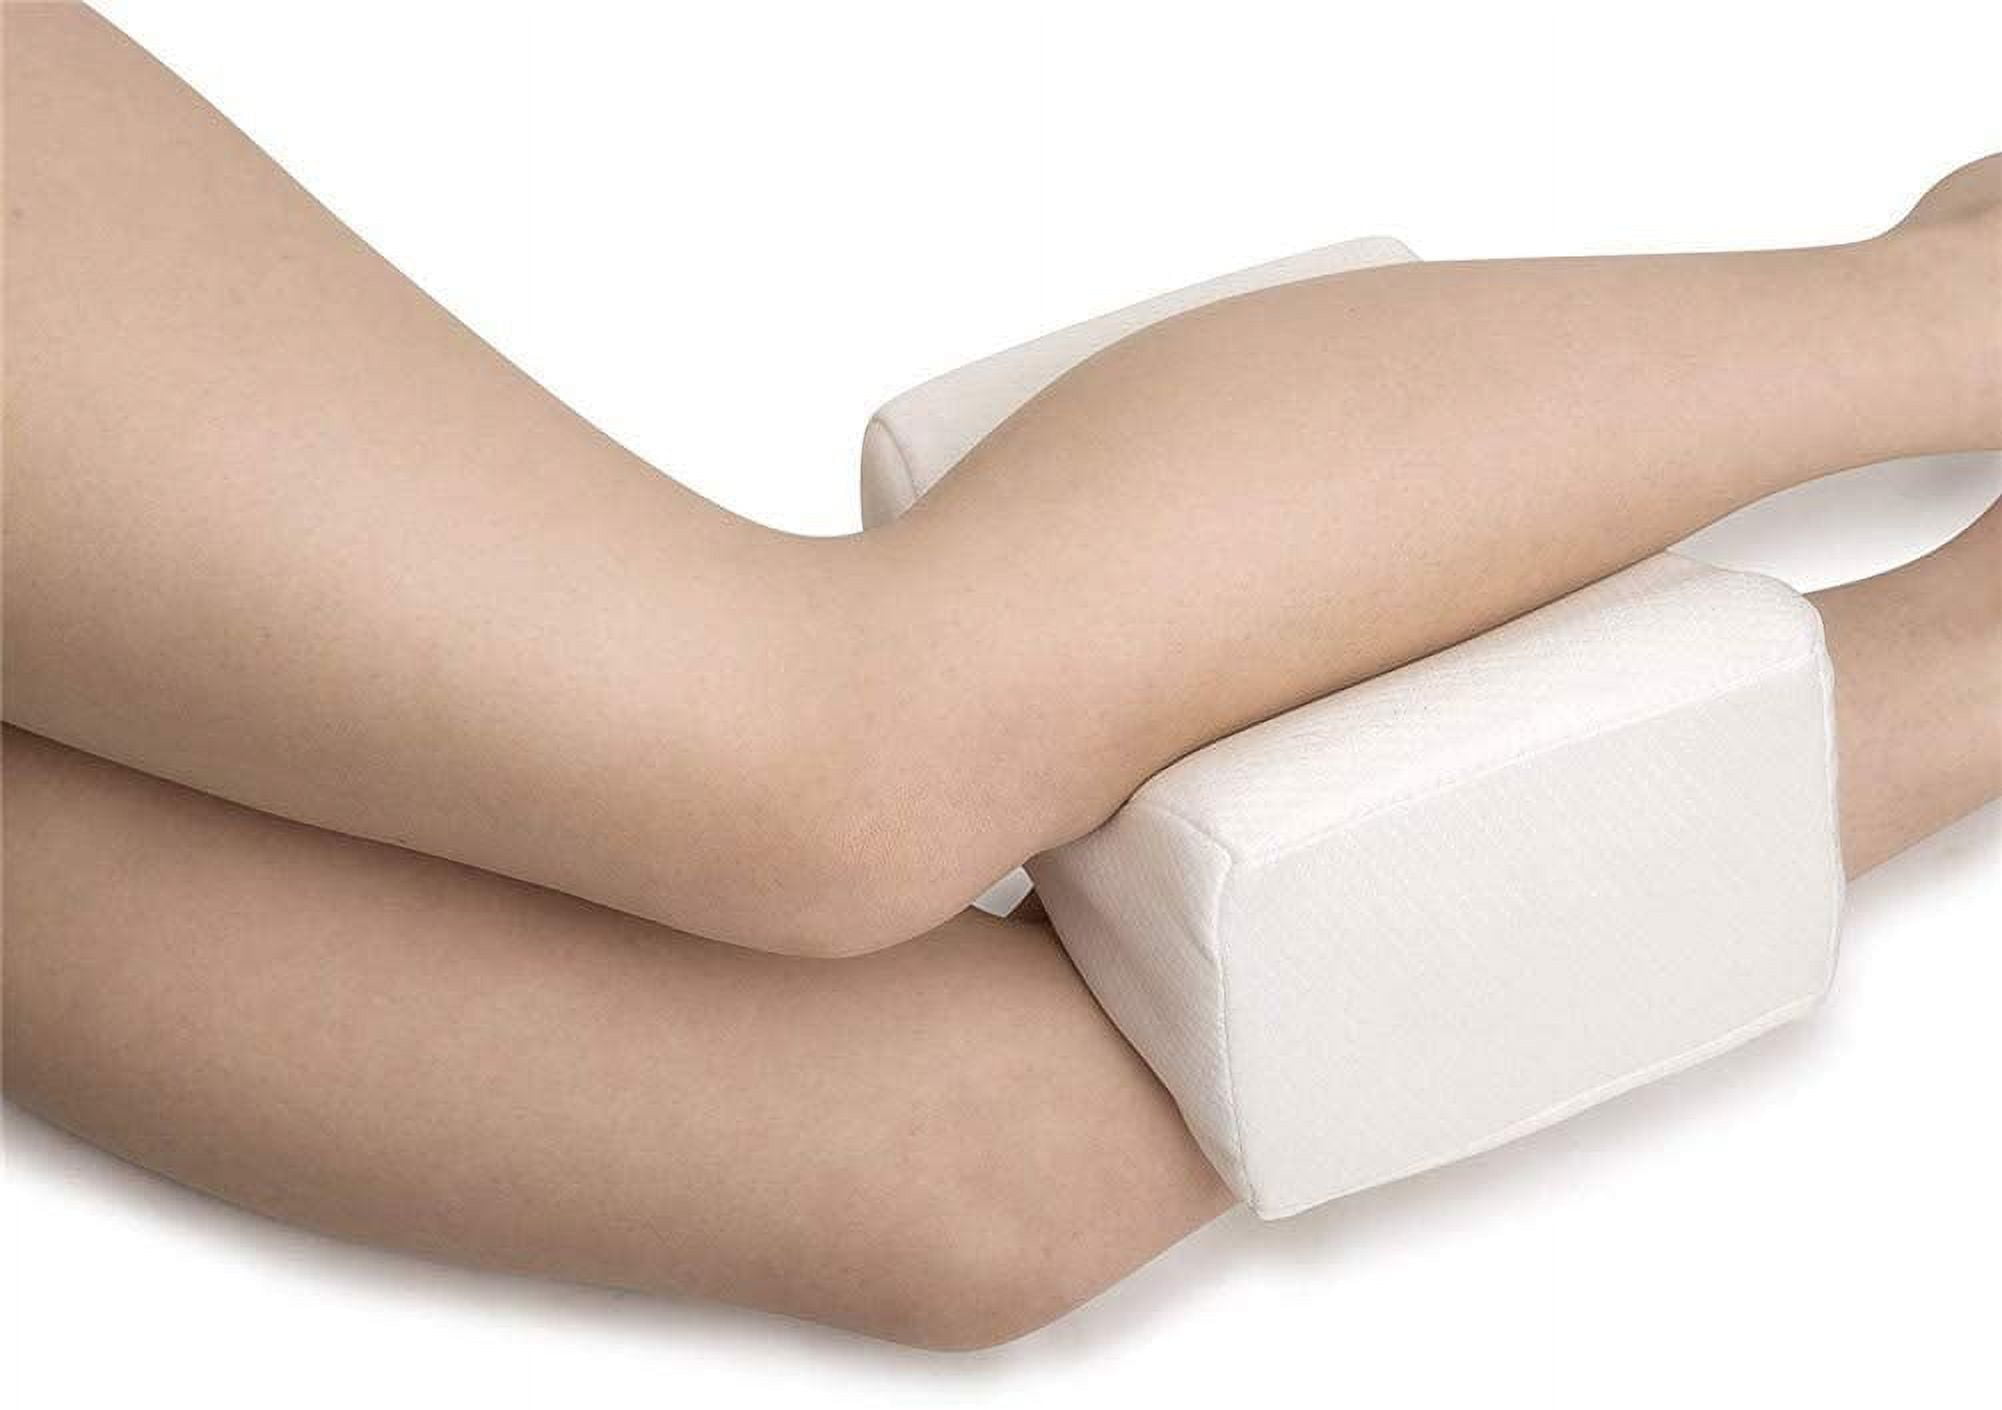 AUVON Contoured Leg Knee Pillow for Sleeping, Cooling Memory Foam Leg  Pillow for Sciatica, Back, Knee and Joint Pain Relief, Helps Spine  Alignment